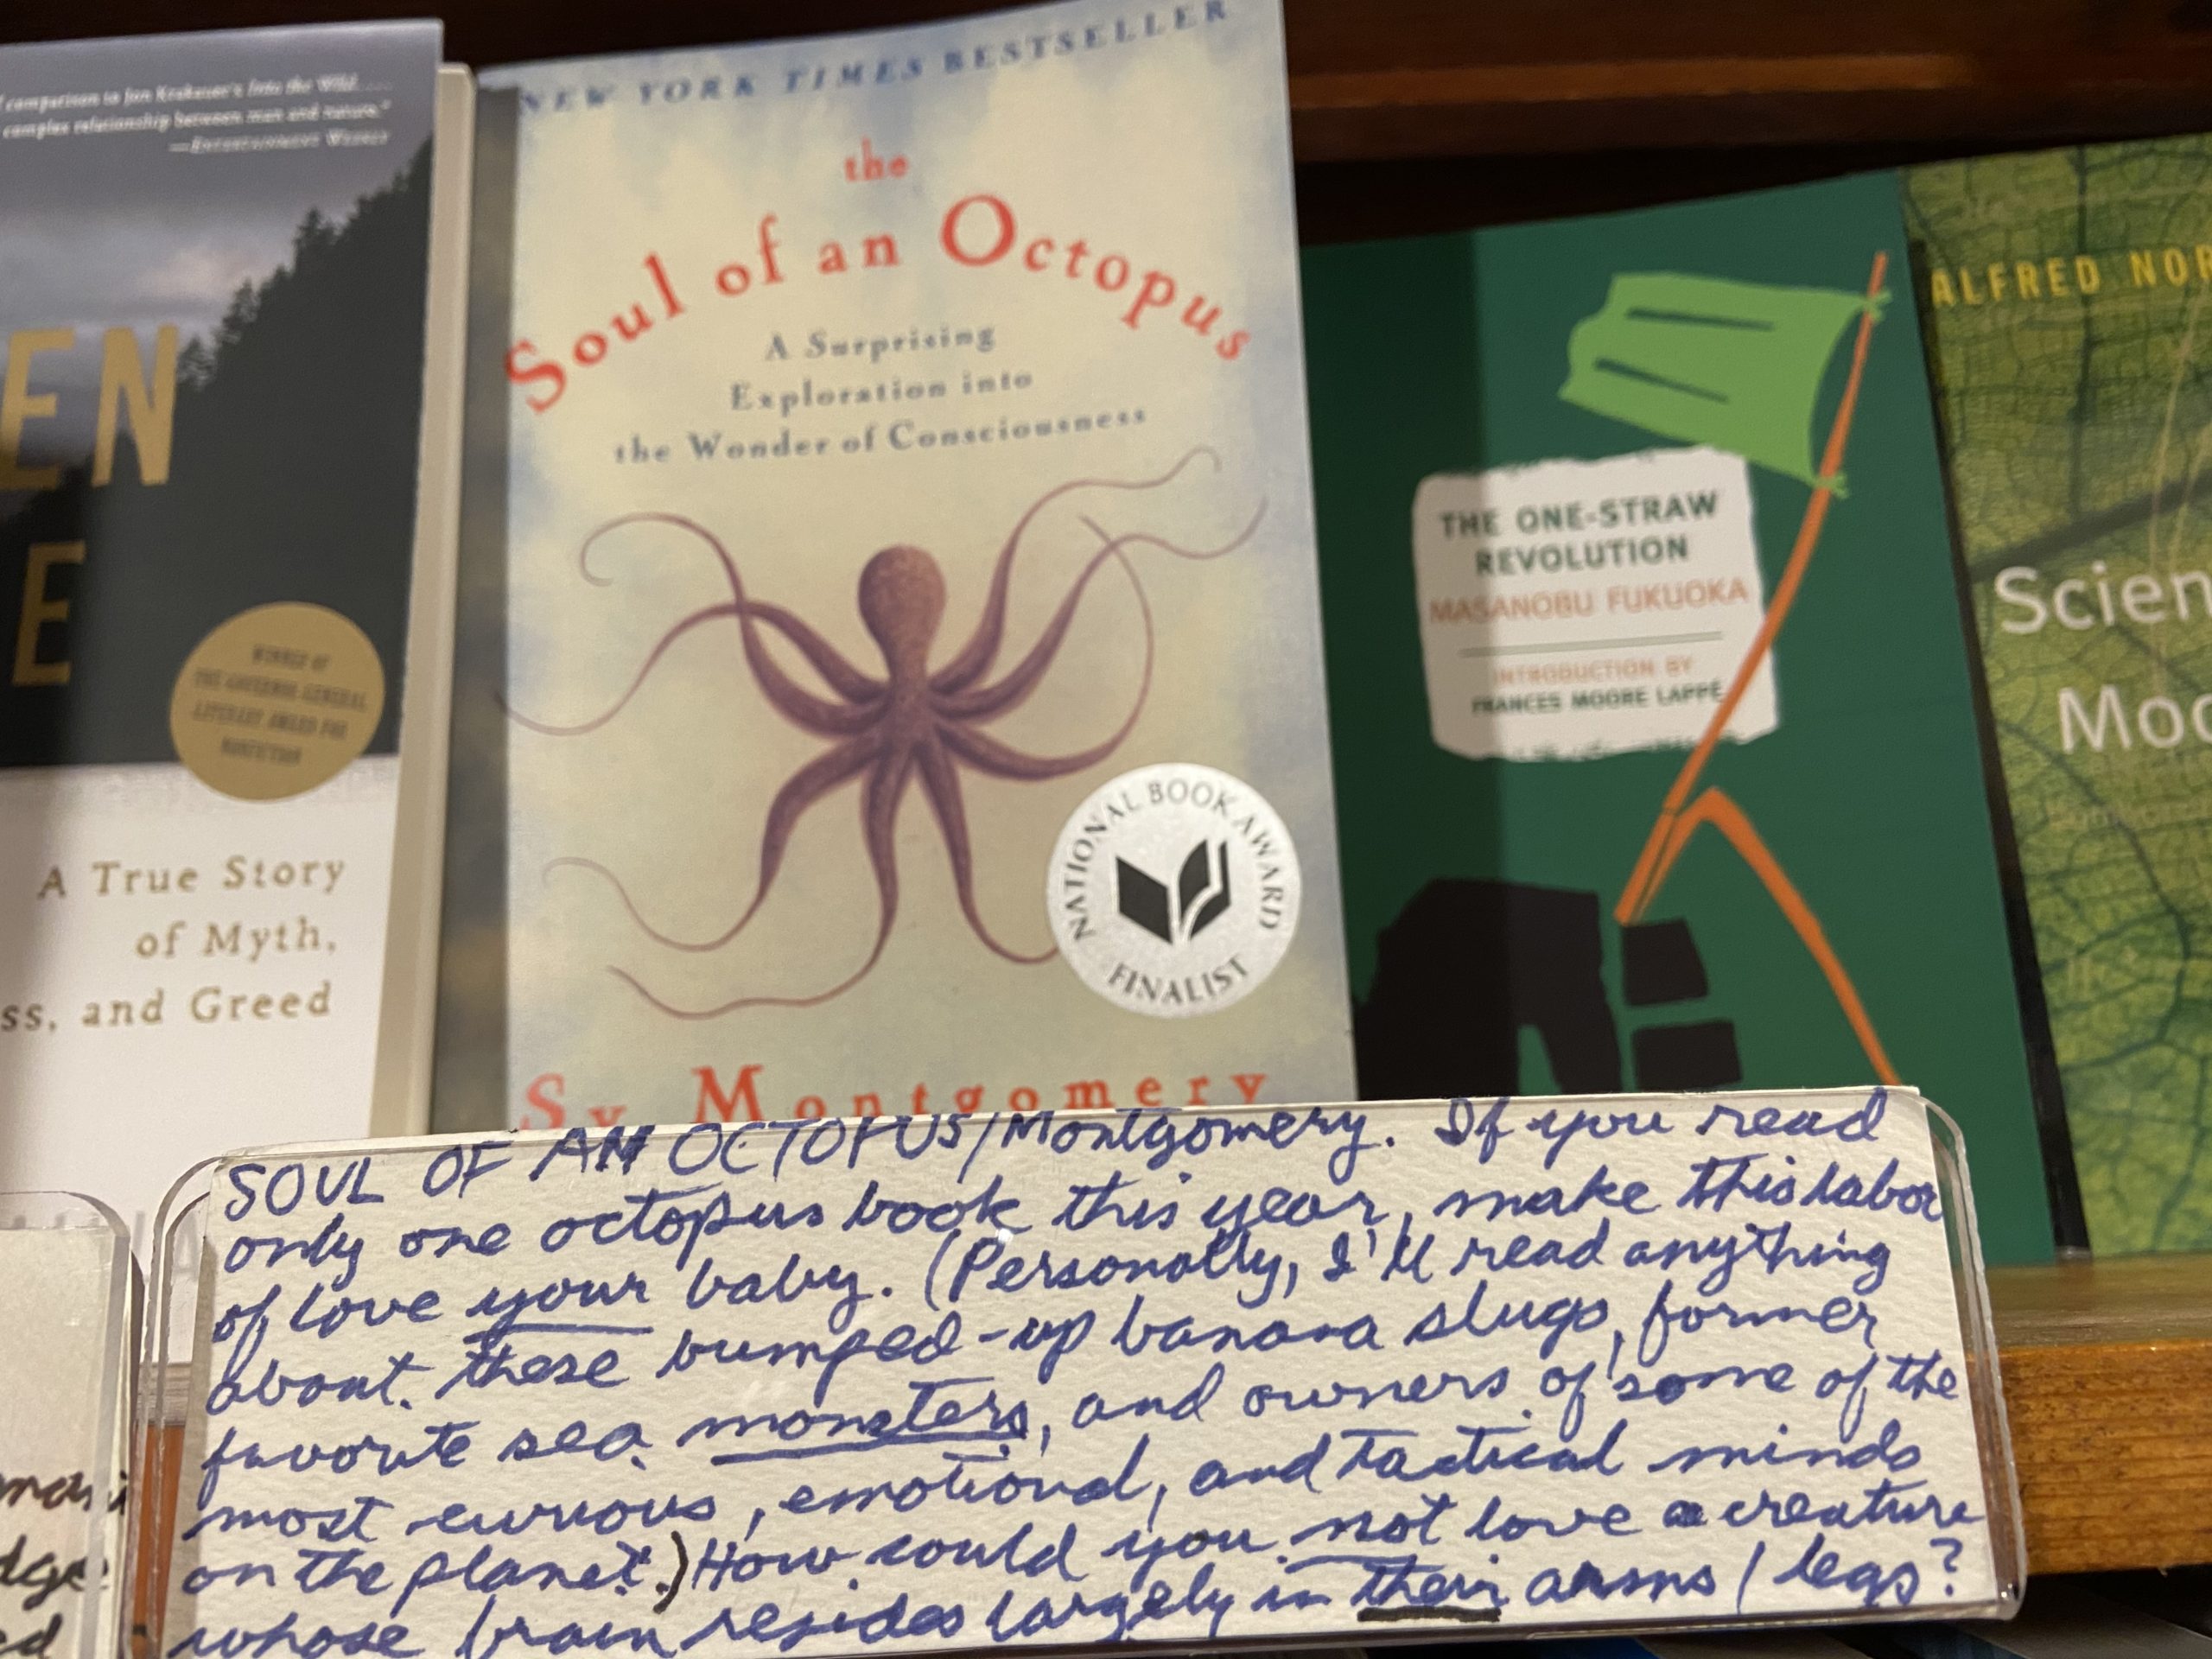 Seen in San Francisco’s Browser Books: “If you read only one octopus book this year make this labor of love your baby.”